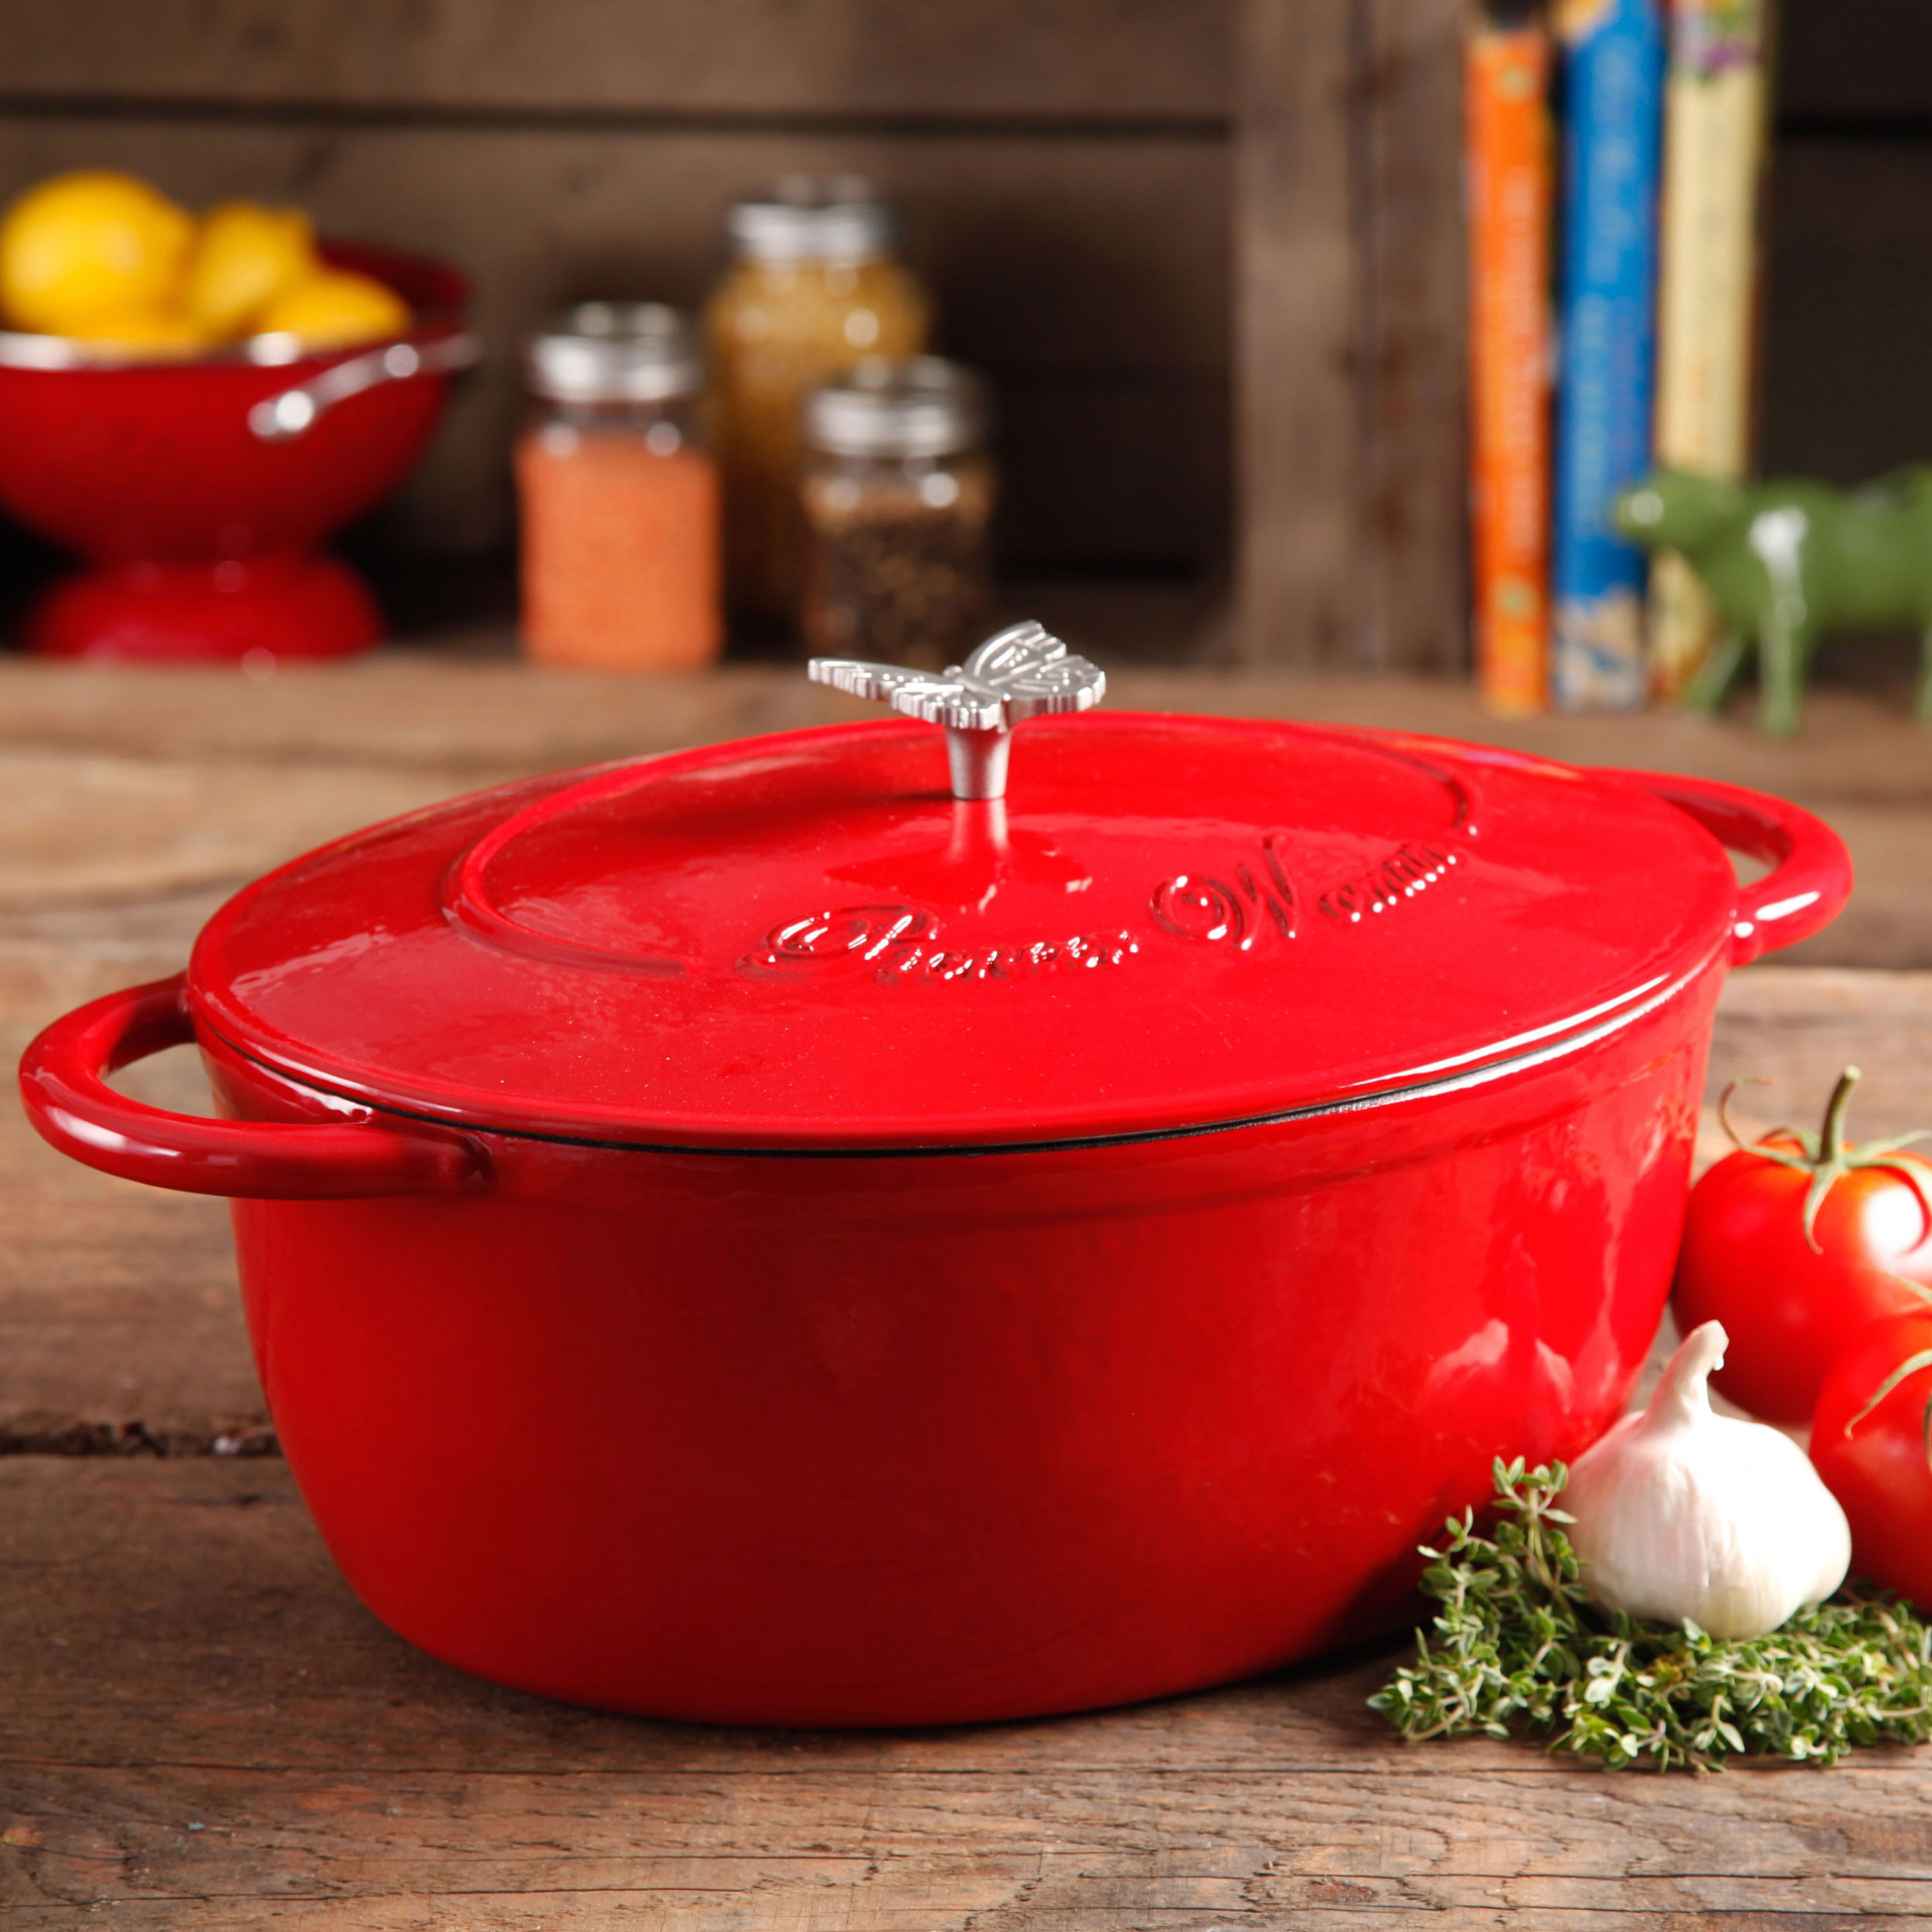 Red The Pioneer Woman Timeless Beauty 5-Quart Cast Iron Dutch Oven with Stainless Steel Butterfly Knob 